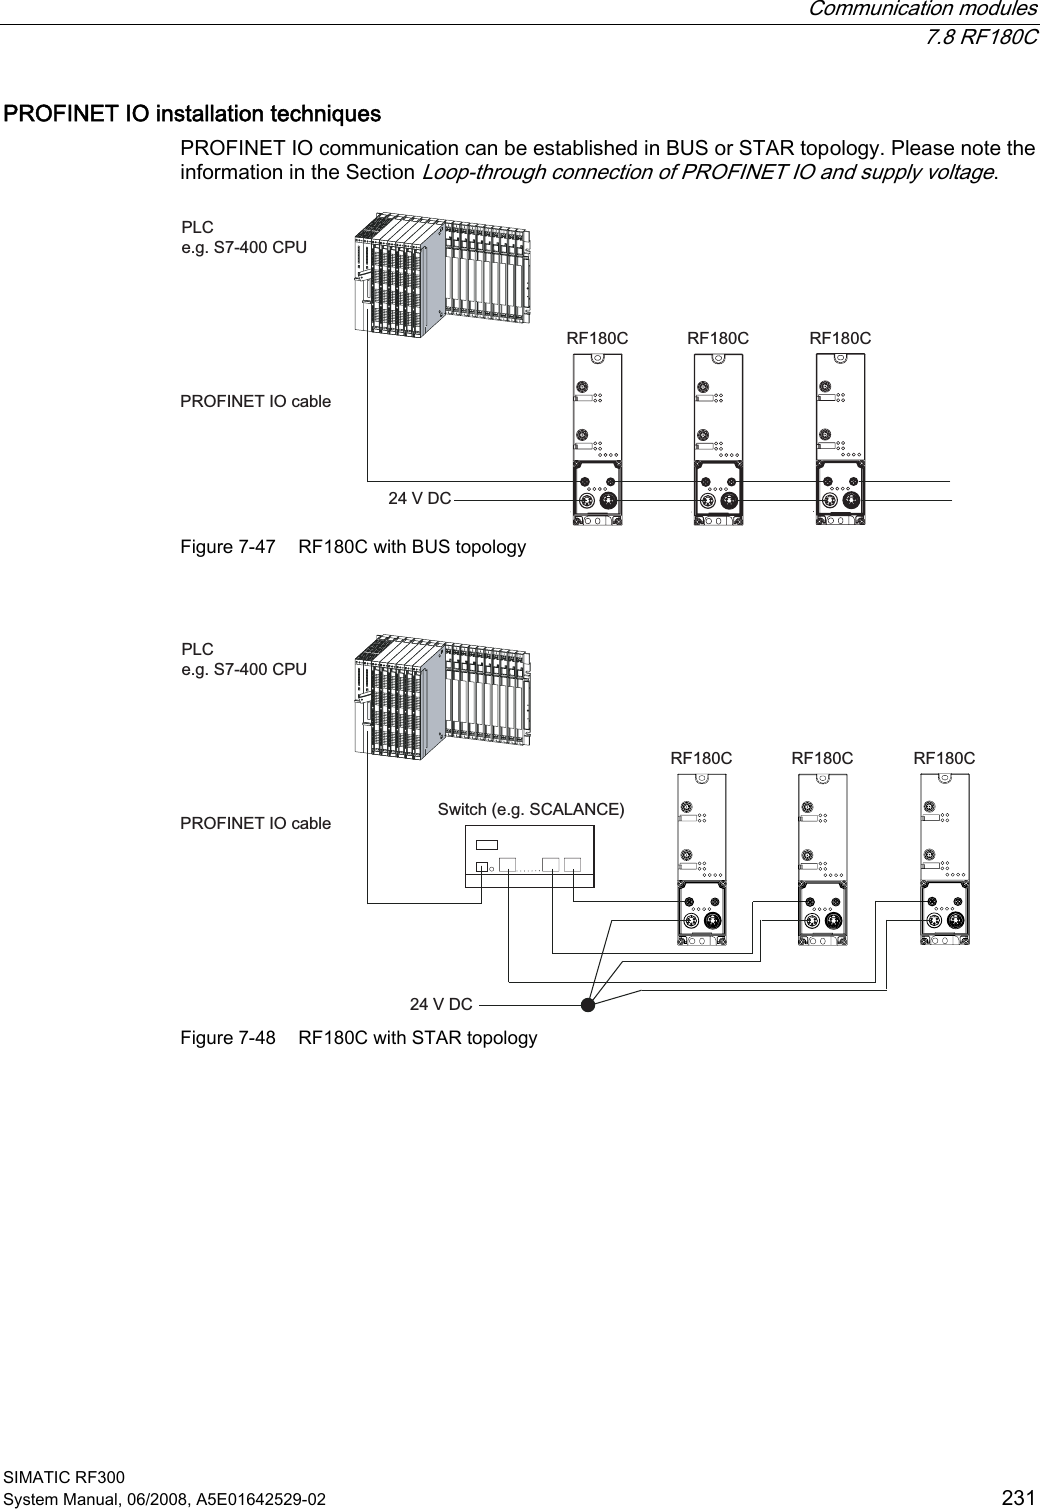  Communication modules  7.8 RF180C SIMATIC RF300 System Manual, 06/2008, A5E01642529-02  231 PROFINET IO installation techniques PROFINET IO communication can be established in BUS or STAR topology. Please note the information in the Section Loop-through connection of PROFINET IO and supply voltage. 3/&amp;HJ6&amp;38352),1(7,2FDEOH9&apos;&amp;5)&amp; 5)&amp; 5)&amp; Figure 7-47  RF180C with BUS topology  3/&amp;HJ6&amp;38352),1(7,2FDEOH9&apos;&amp;6ZLWFKHJ6&amp;$/$1&amp;(5)&amp; 5)&amp; 5)&amp; Figure 7-48  RF180C with STAR topology  